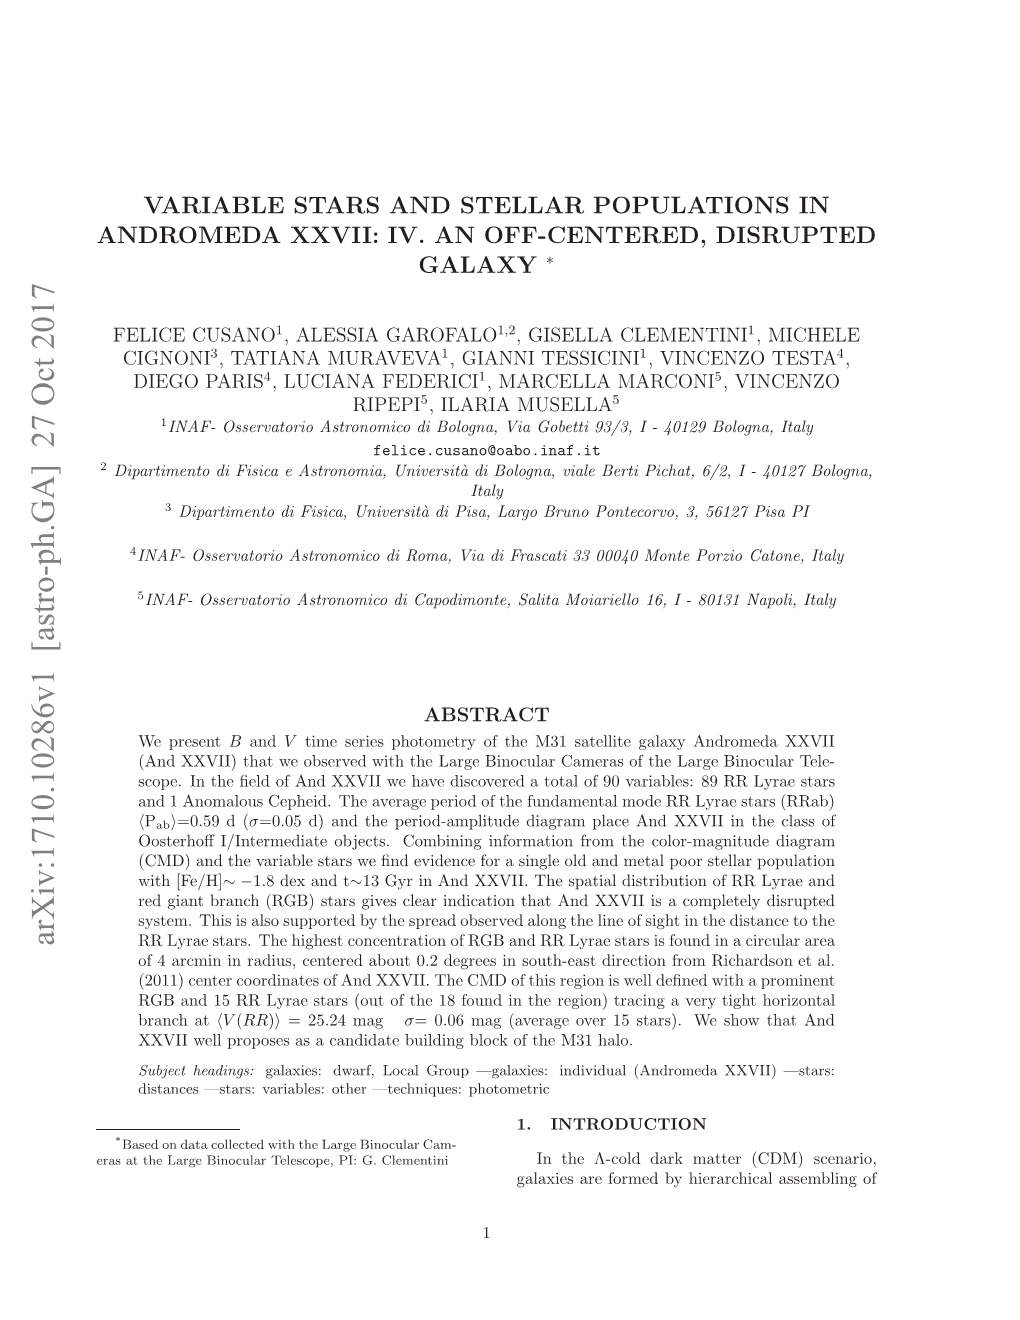 Variable Stars and Stellar Populations in Andromeda XXVII: IV. an Off